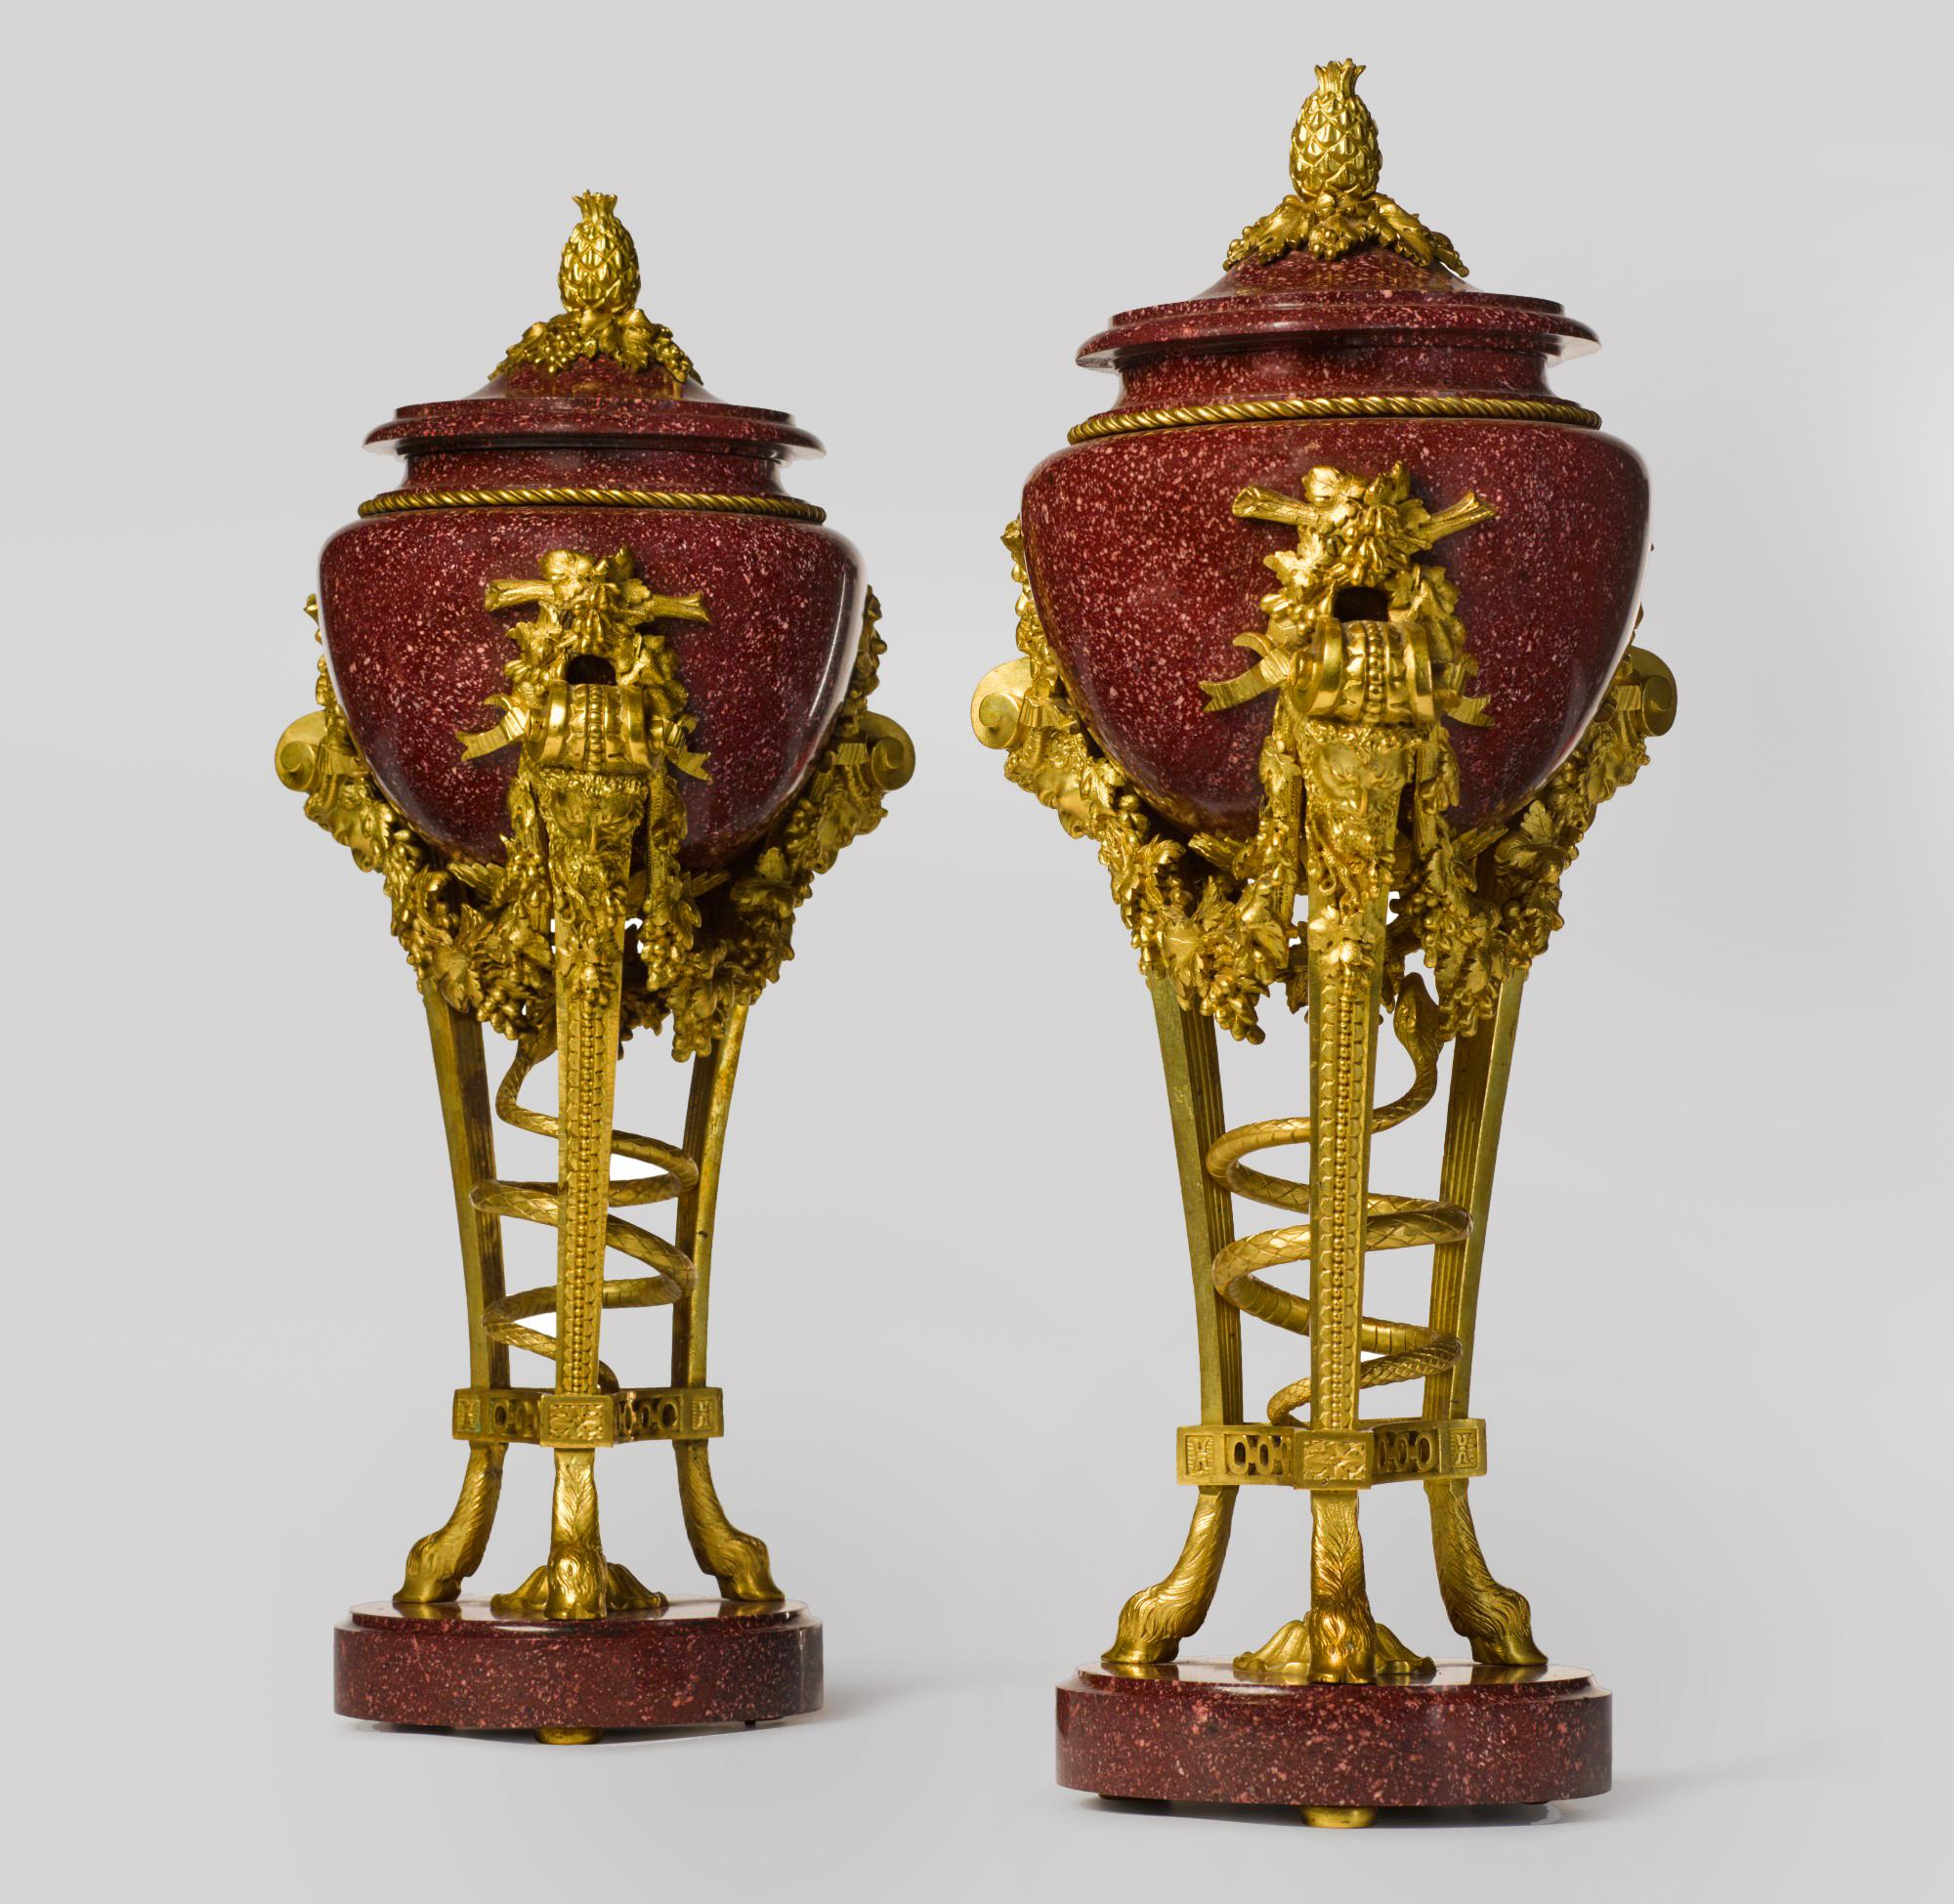 A pair of Louis XVI style gilt bronze mounted porphyry urns, after the Model by Pierre Gouthière.

Each urn is of neoclassical design, each with a circular base and a triform frame with a coiled snake in the center. The gilt bronze supports are